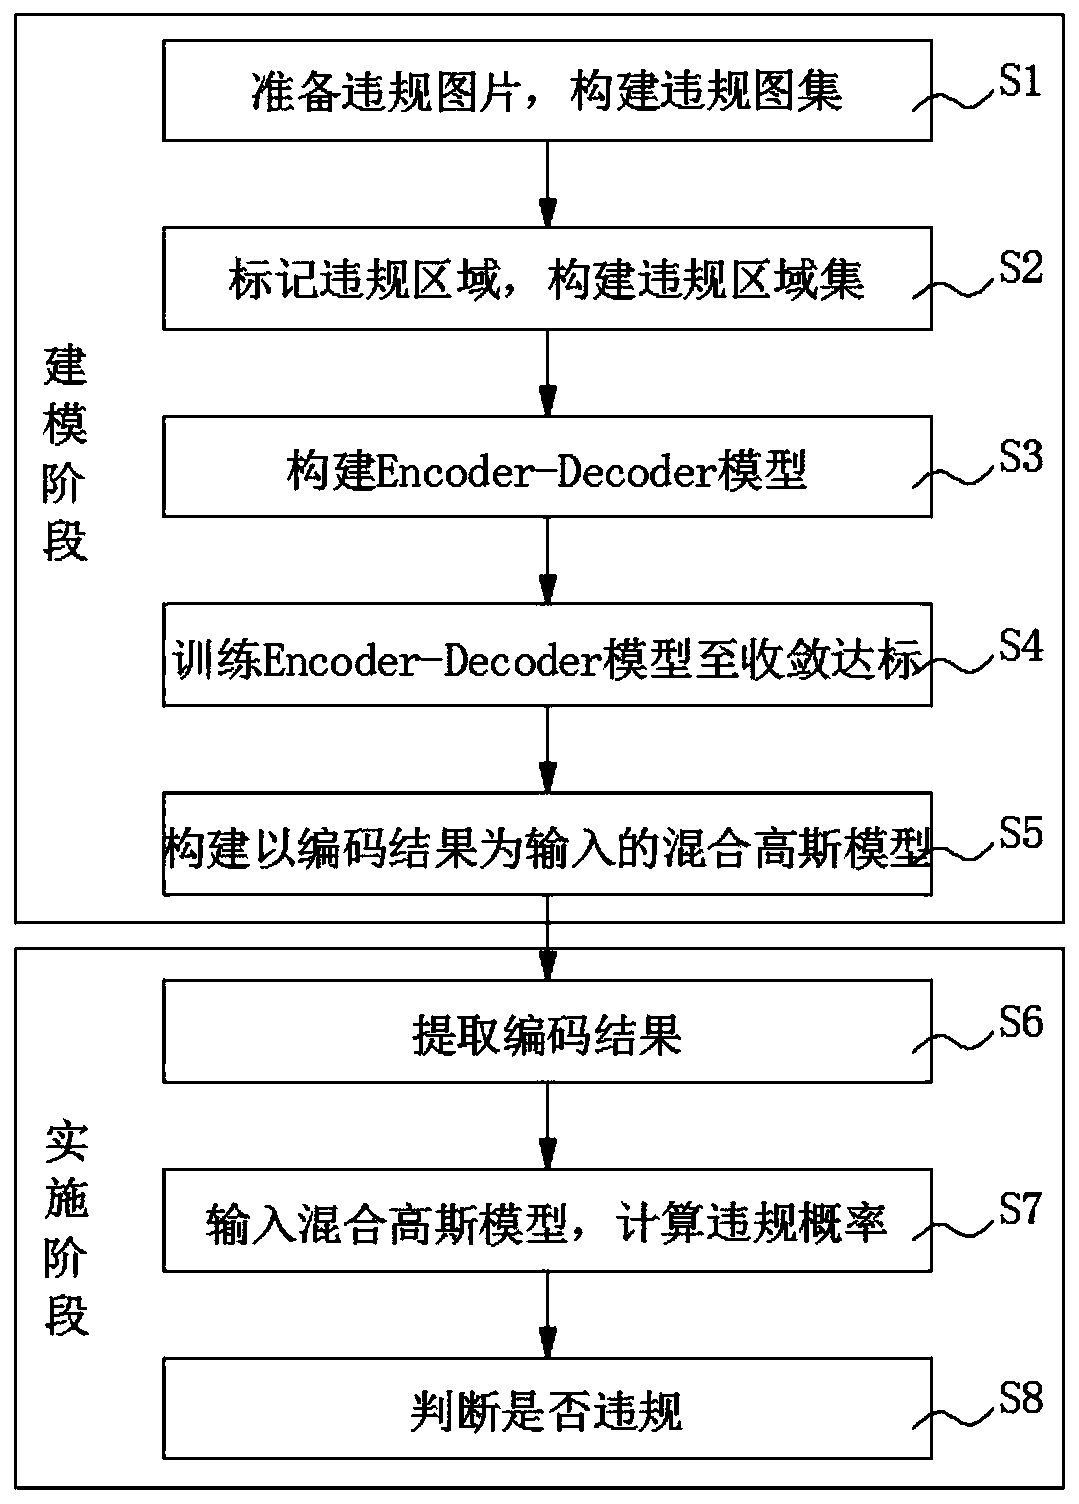 Catering kitchen violation judgment method based on Encoder-Decoder model and Gaussian mixture model